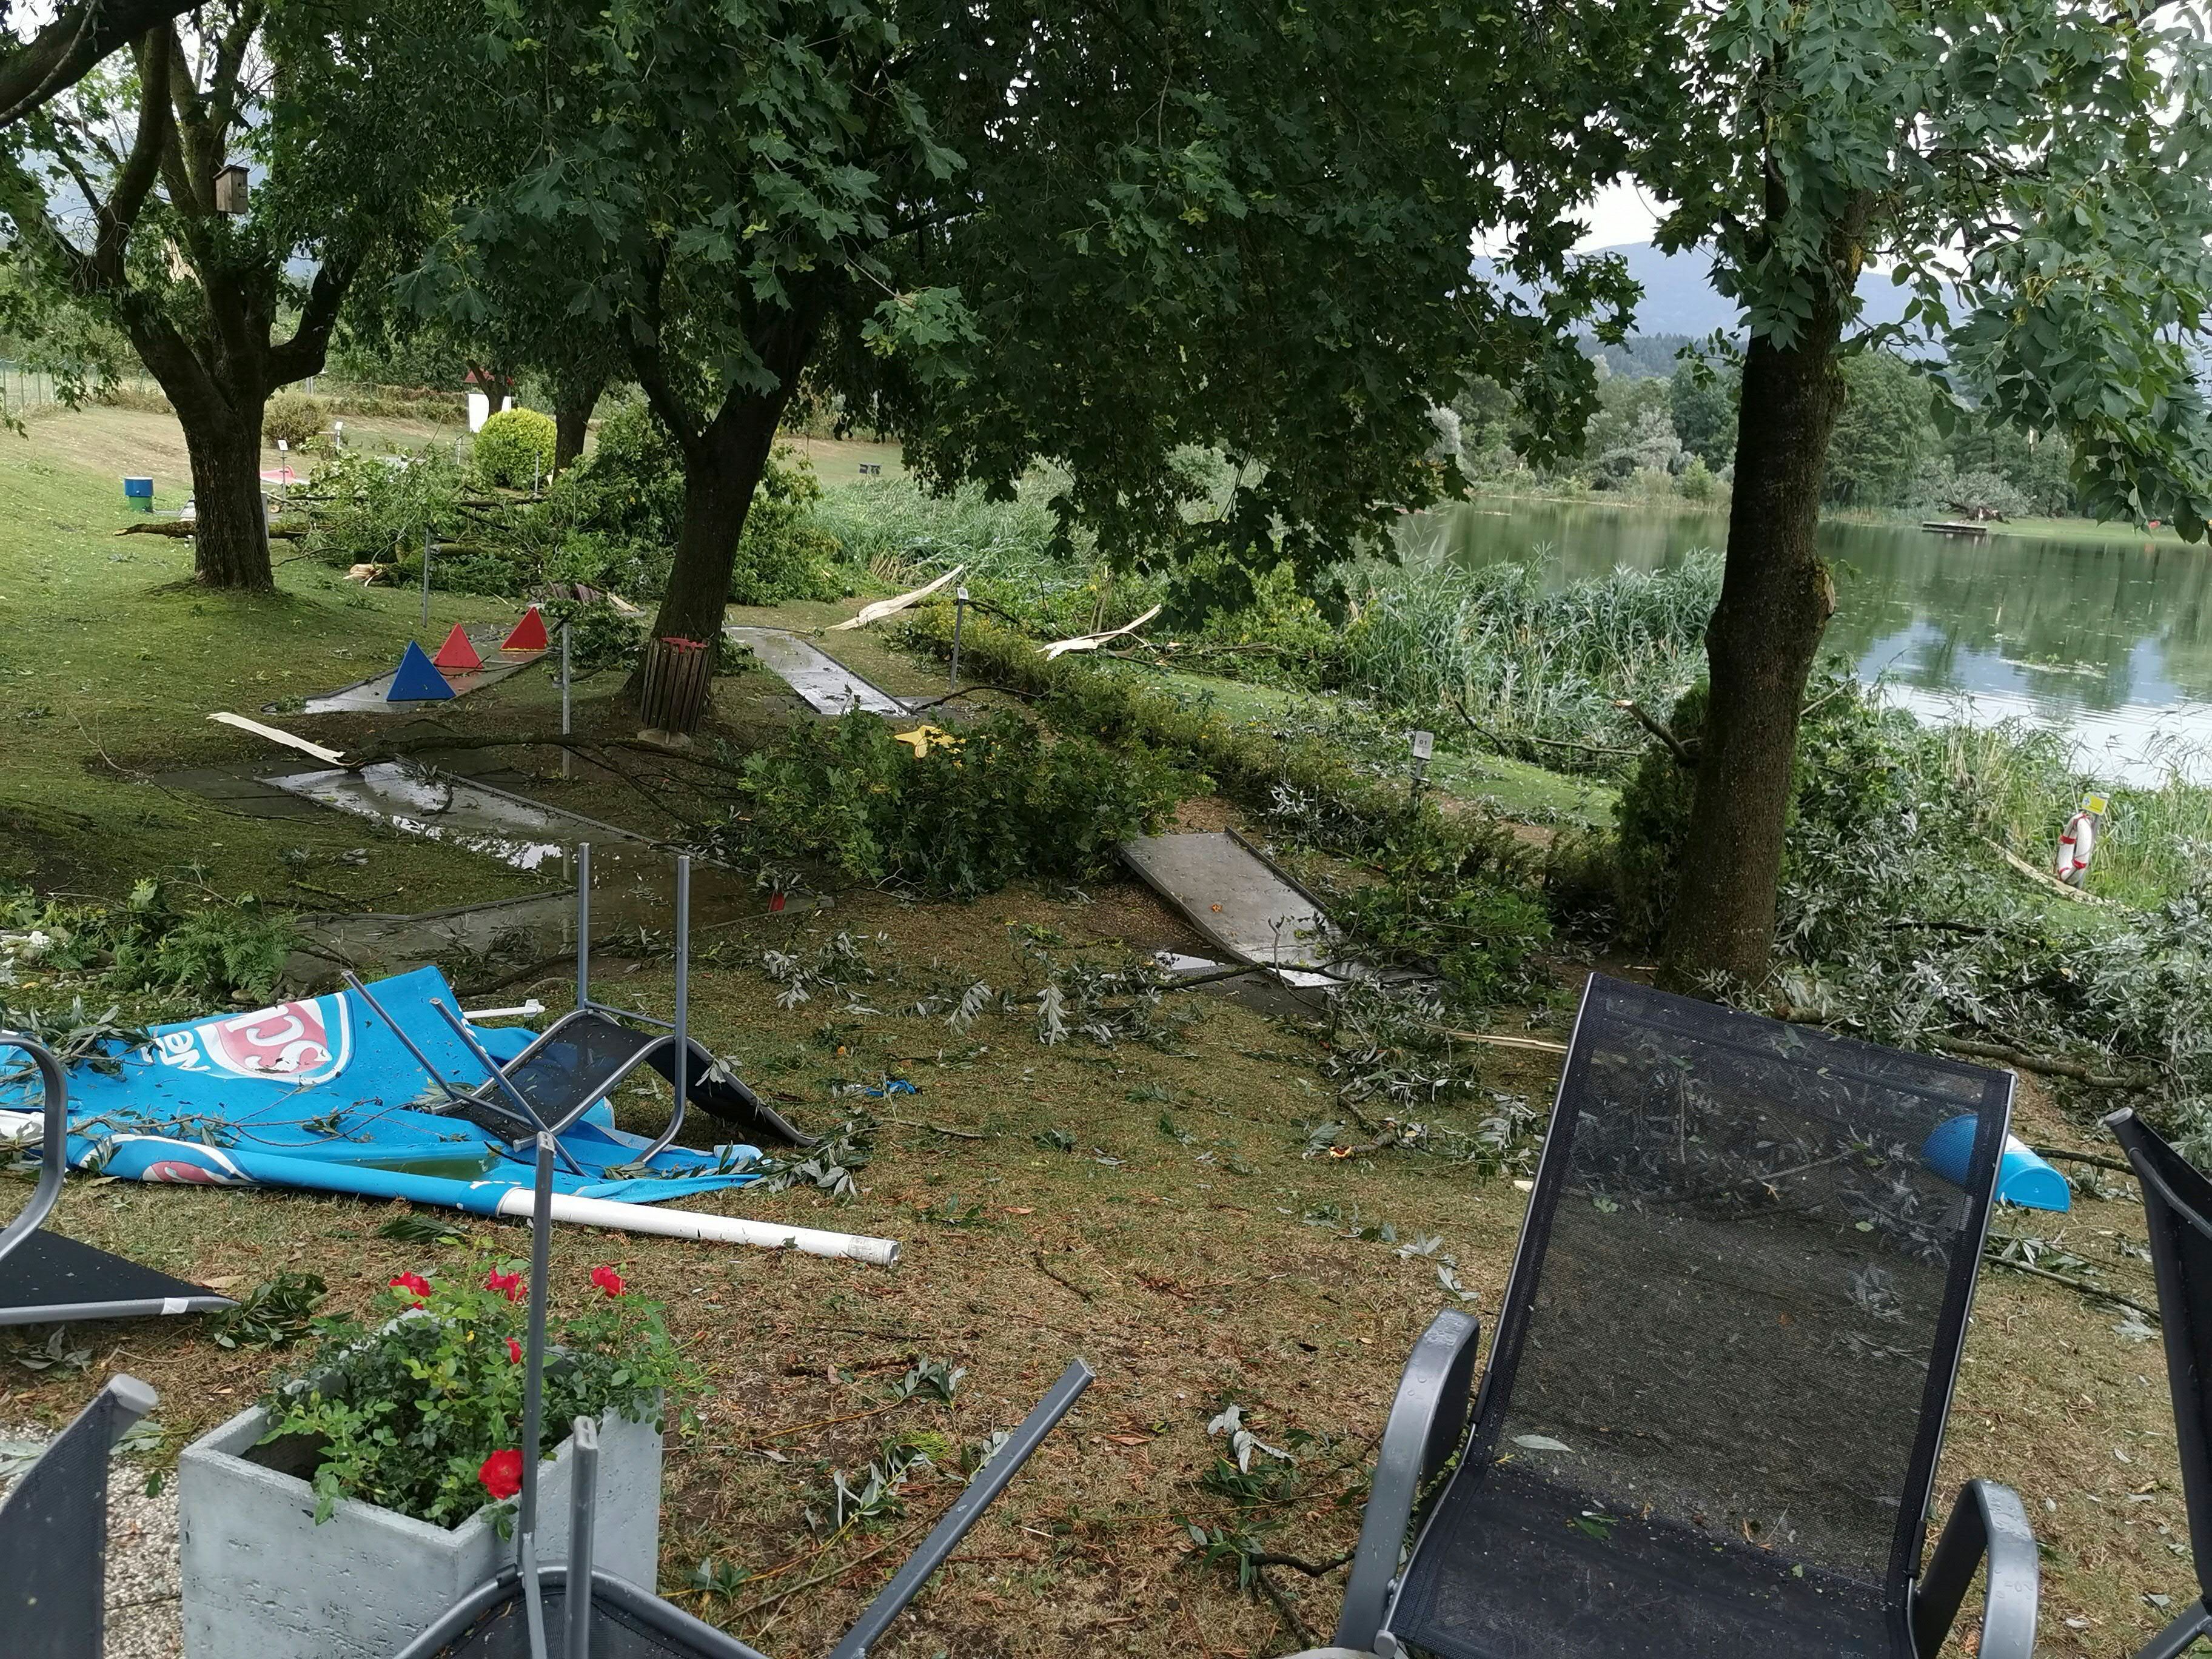  Branches and fallen trees are seen near Lake St. Andraer after a severe storm hit in Lavanttal, southern Austria, on August 18, 2022, killing two children.